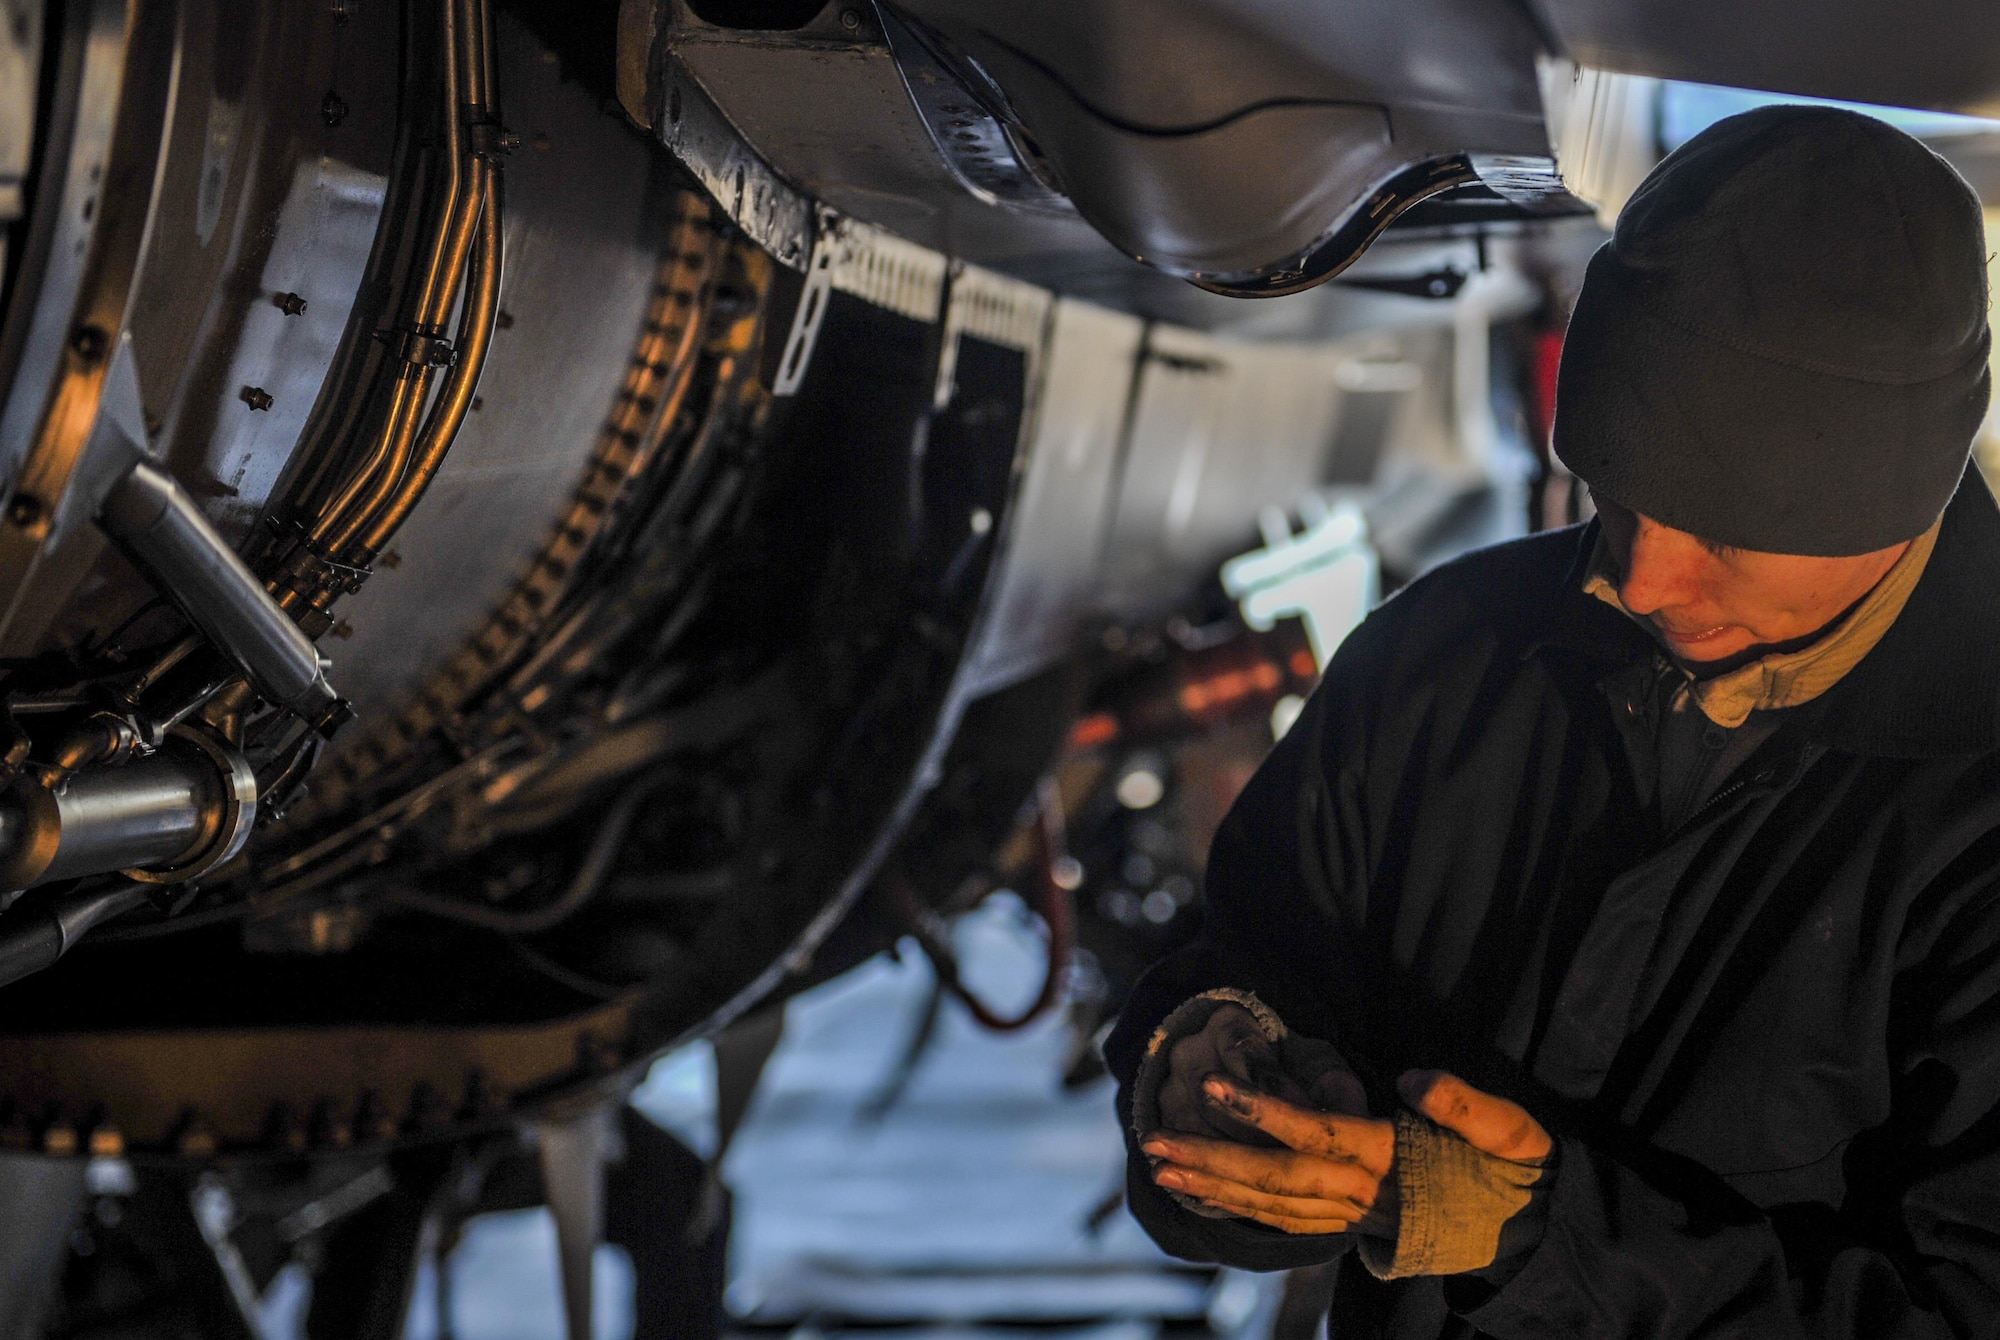 Senior Airman Shane Fortune, 8th Maintenance Squadron phase inspection team member, inspects a part of an F-16 Fighting Falcon at Kunsan Air Base, Republic of Korea, Dec. 6, 2016. Fortune works with a team of Airmen during phase inspections to ensure aircraft are prepared for flight. Phase inspections are performed on aircraft every 400 flight hours and involve procedural maintenance actions that require robust attention to detail. (U.S. Air Force photo by Senior Airman Colville McFee/Released)